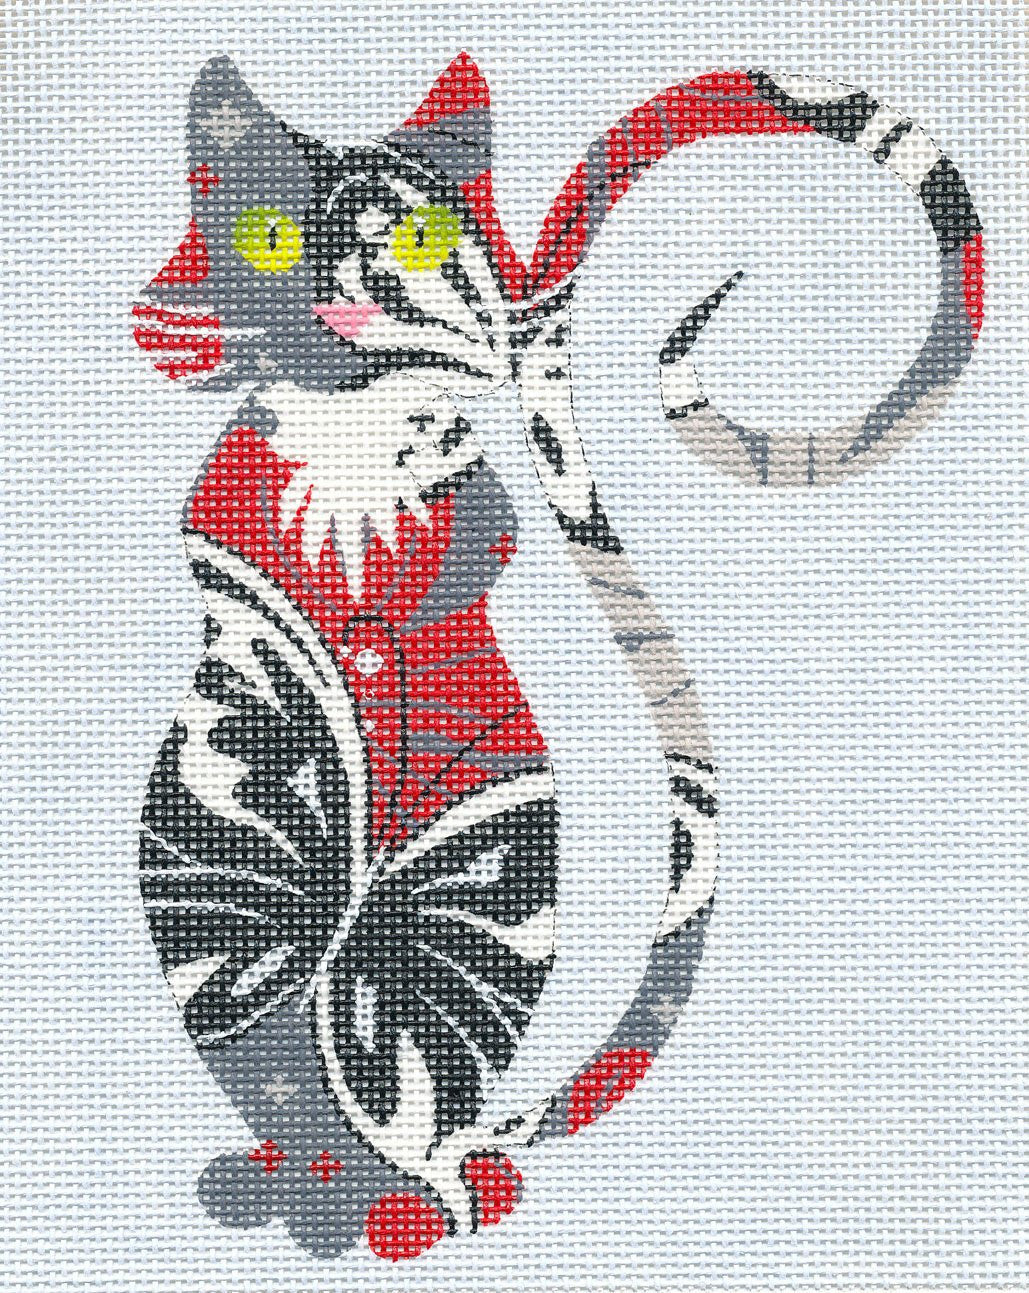 Cat canvas ~ Sophisticated Butterfly Cat handpainted 18 mesh Needlepoint Canvas or Insert by LEE